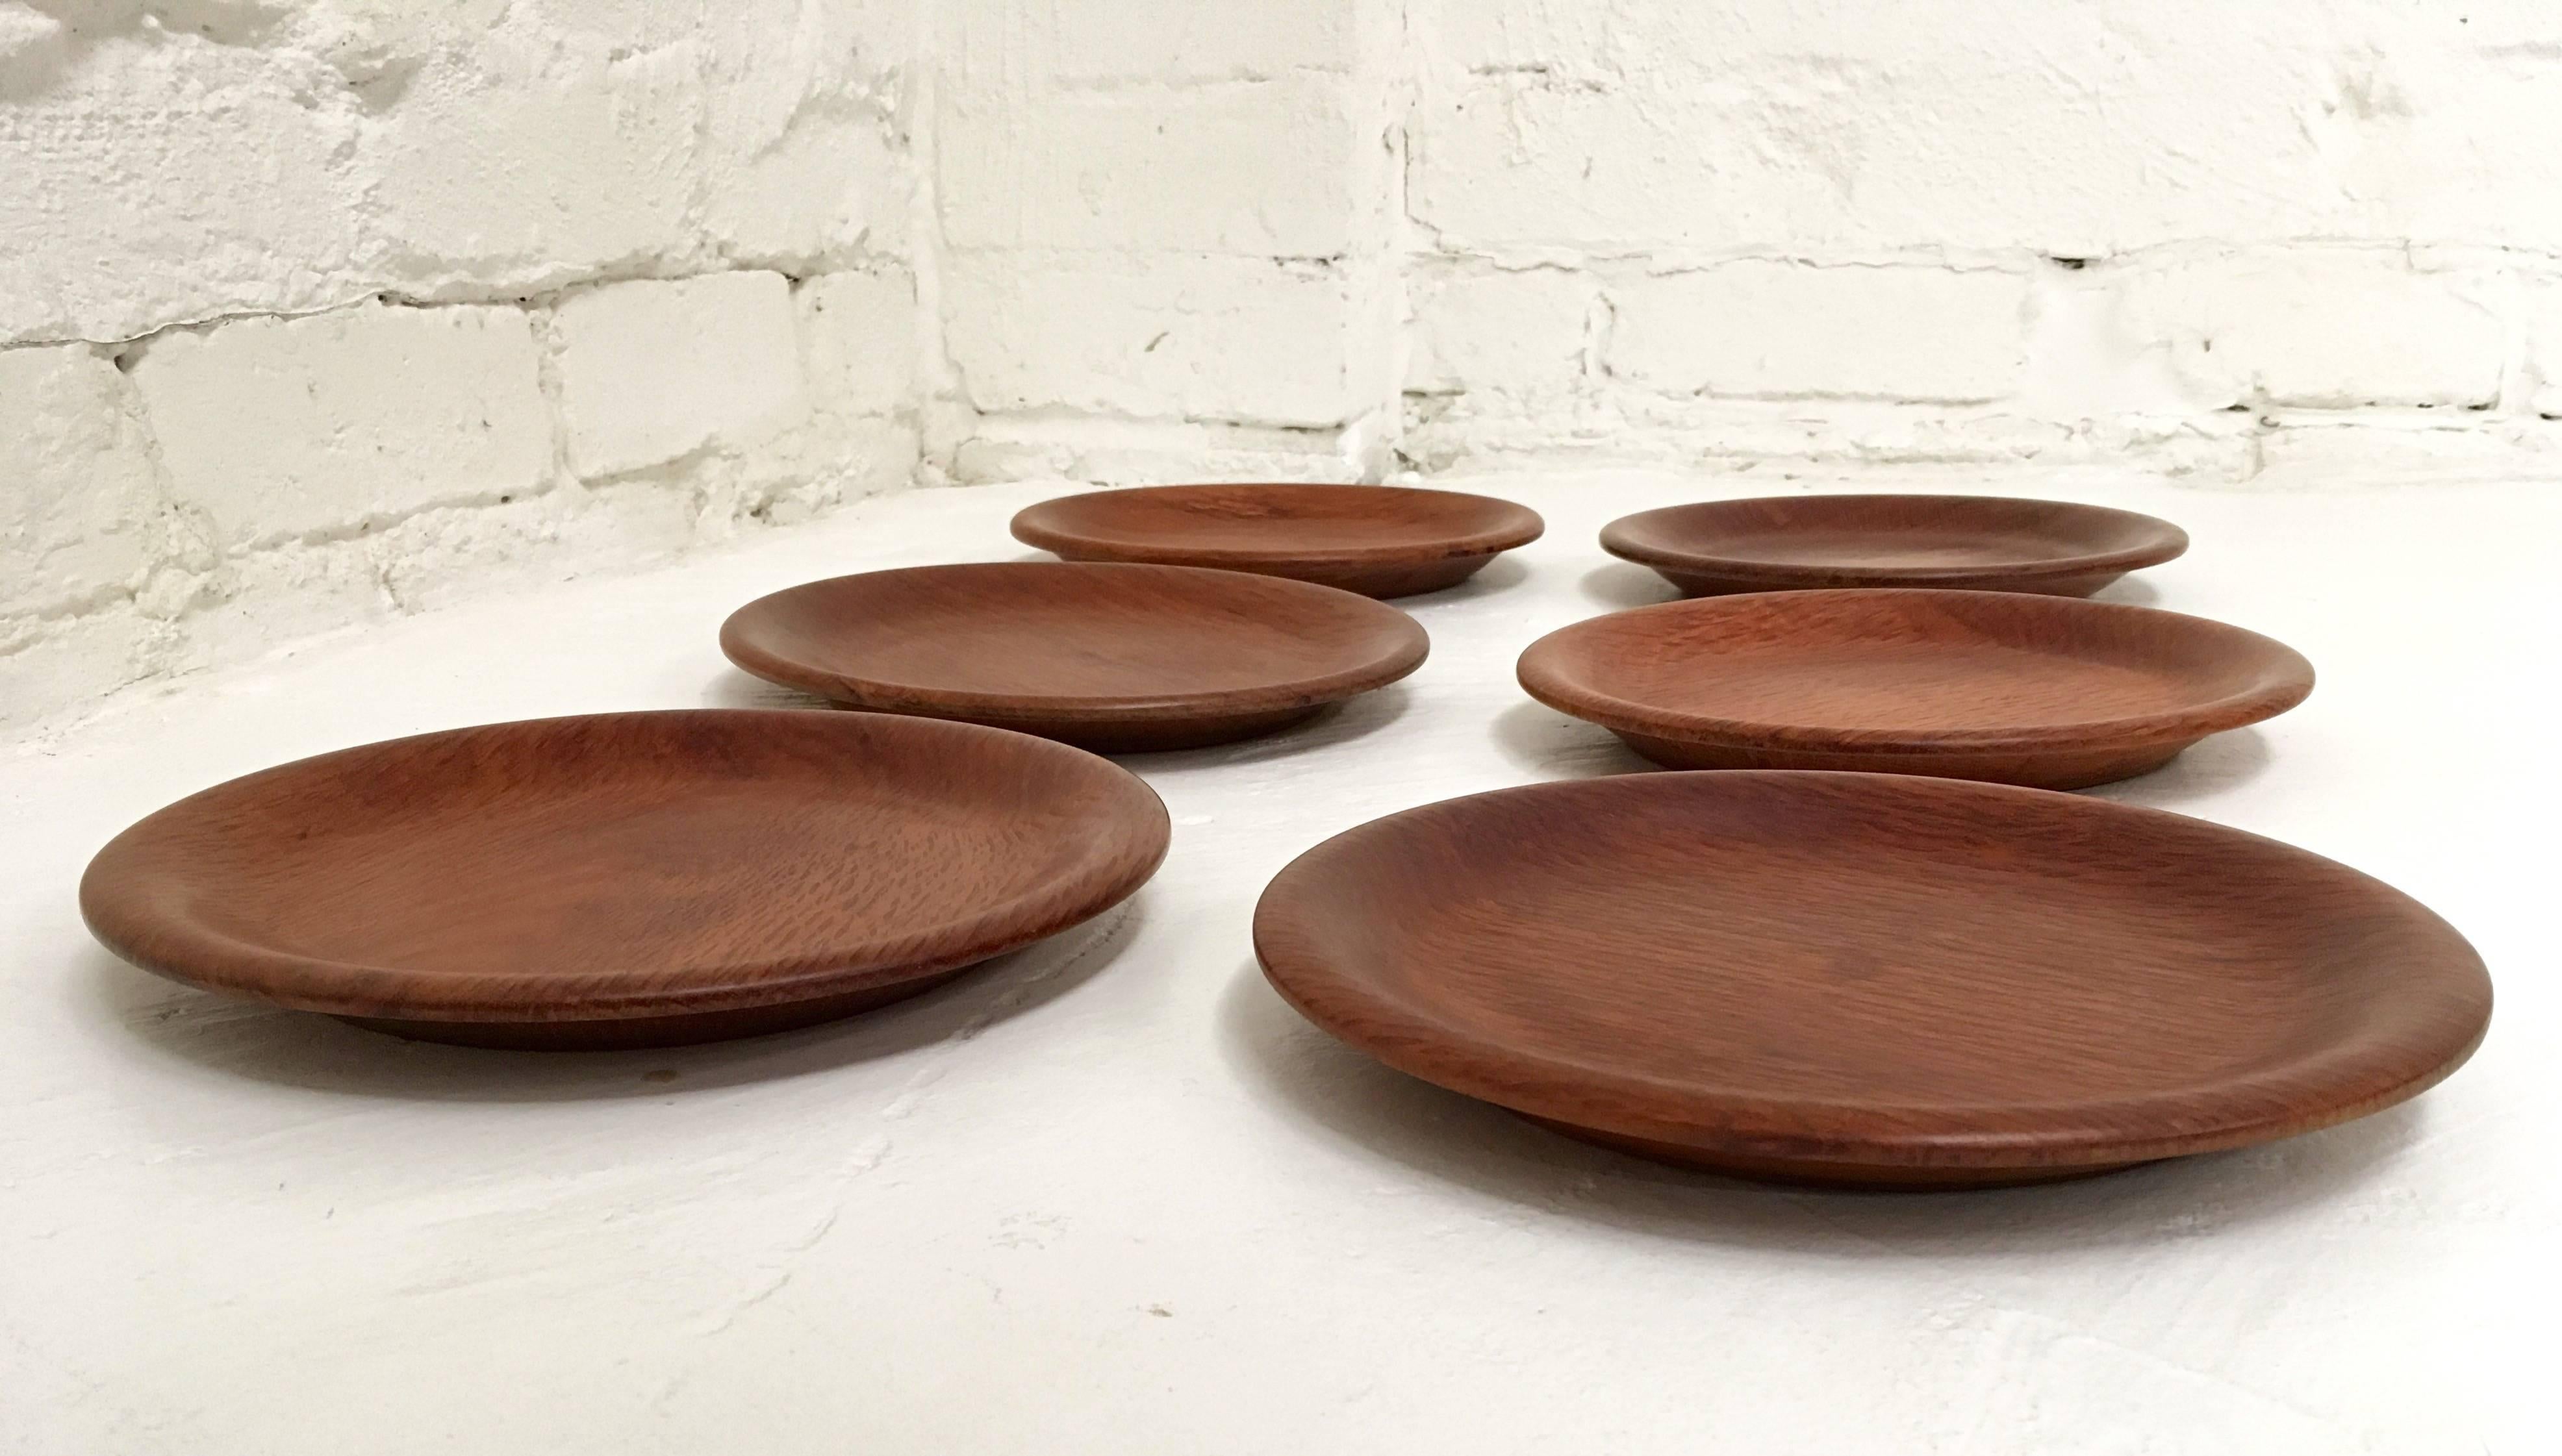 This beautiful set consists of six hand-turned Australian She-oak timber medium sized dinner plates. The quality of she-oak or Casuarina timber makes it an attractive material for woodturning, with it's deep golden to umber tones and beautiful,